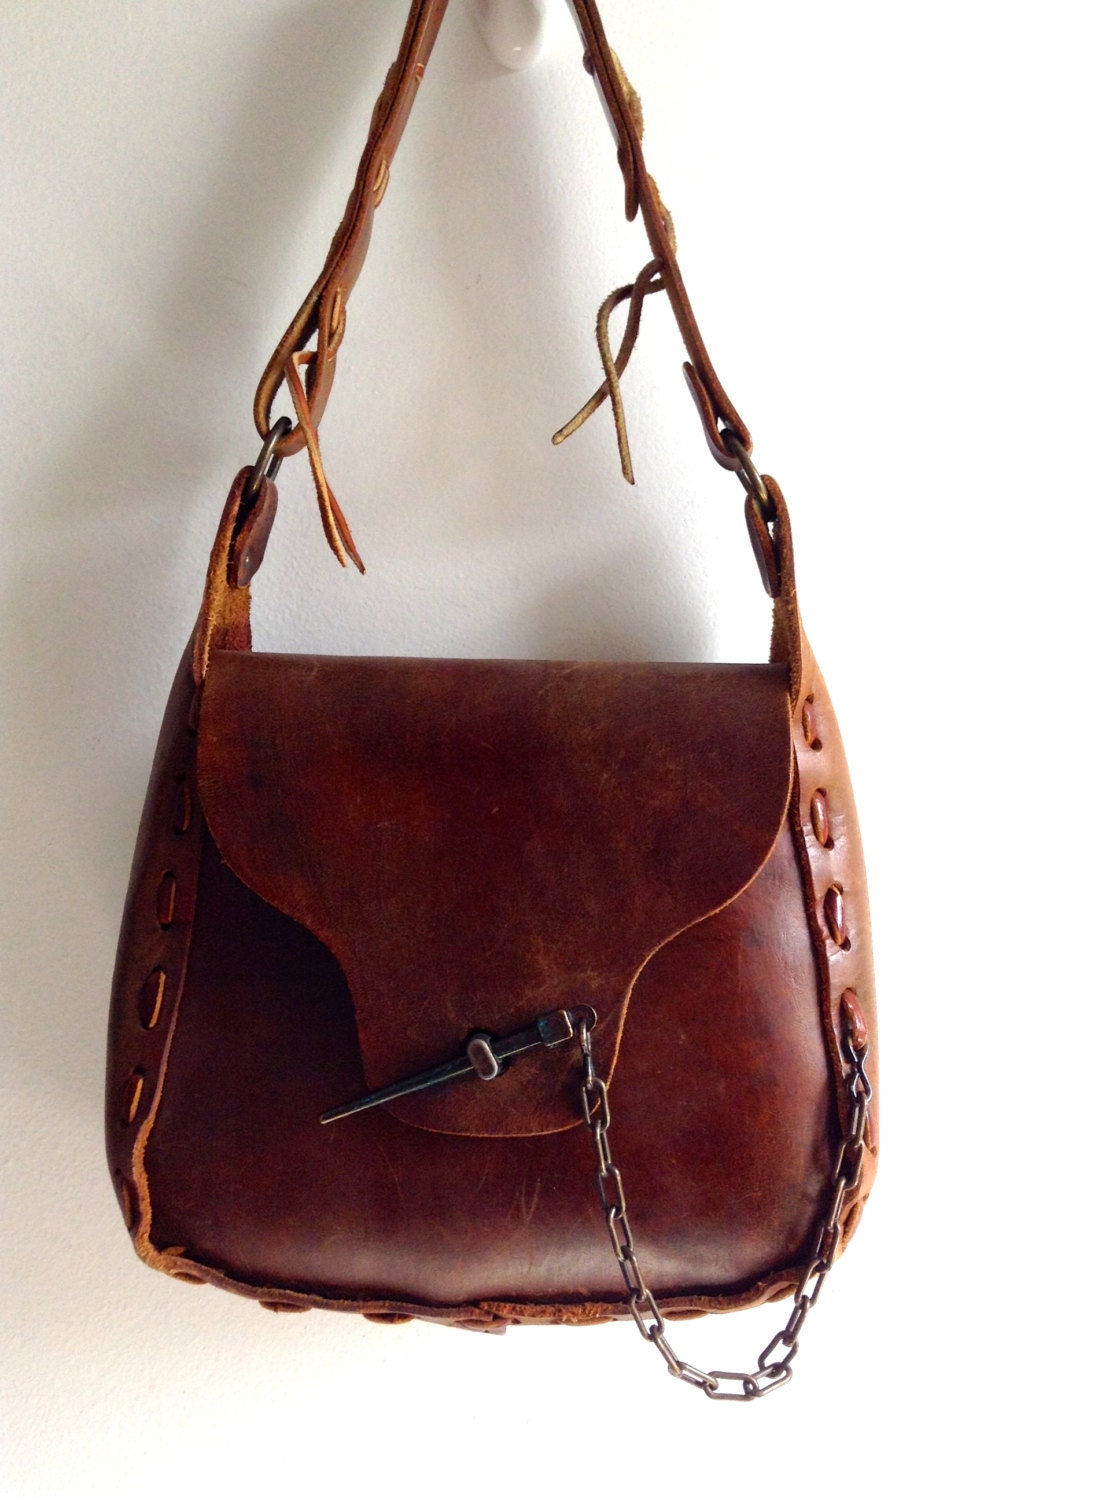 Vintage leather Hippie Bag Purse. Hand made with spike metal